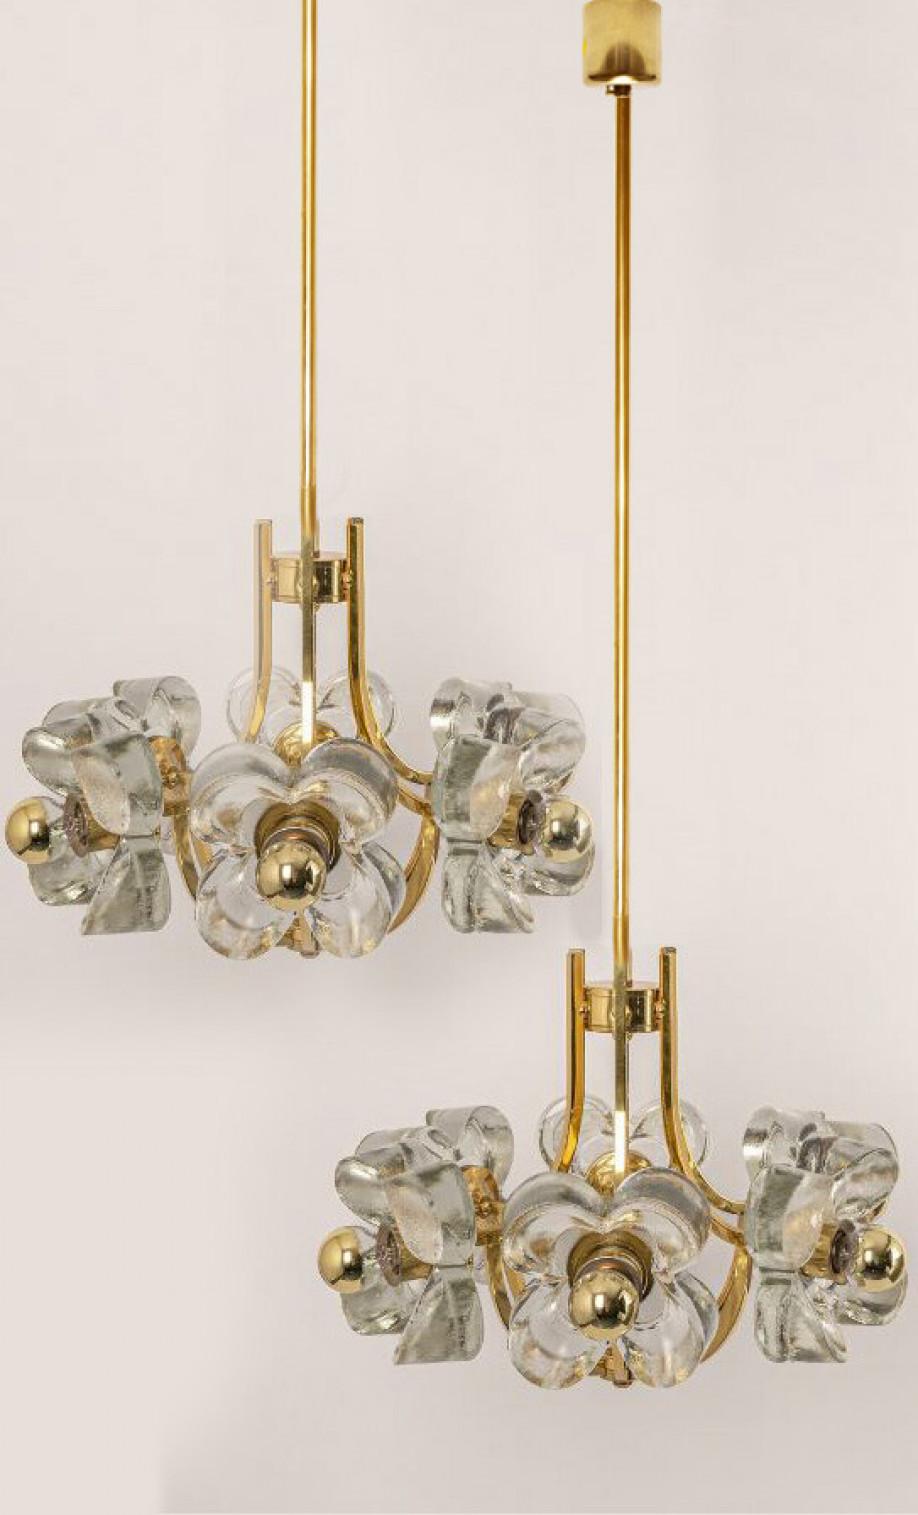 This ceiling light was designed by Simon and Schelle, featuring a rectangular brass base and six massive glasses in the shape of a three lobed flower.

Dimensions:
Height 37.41 (95 cm)
Diameter 17.72 (45 cm)

Please notice the price is for 1 piece,